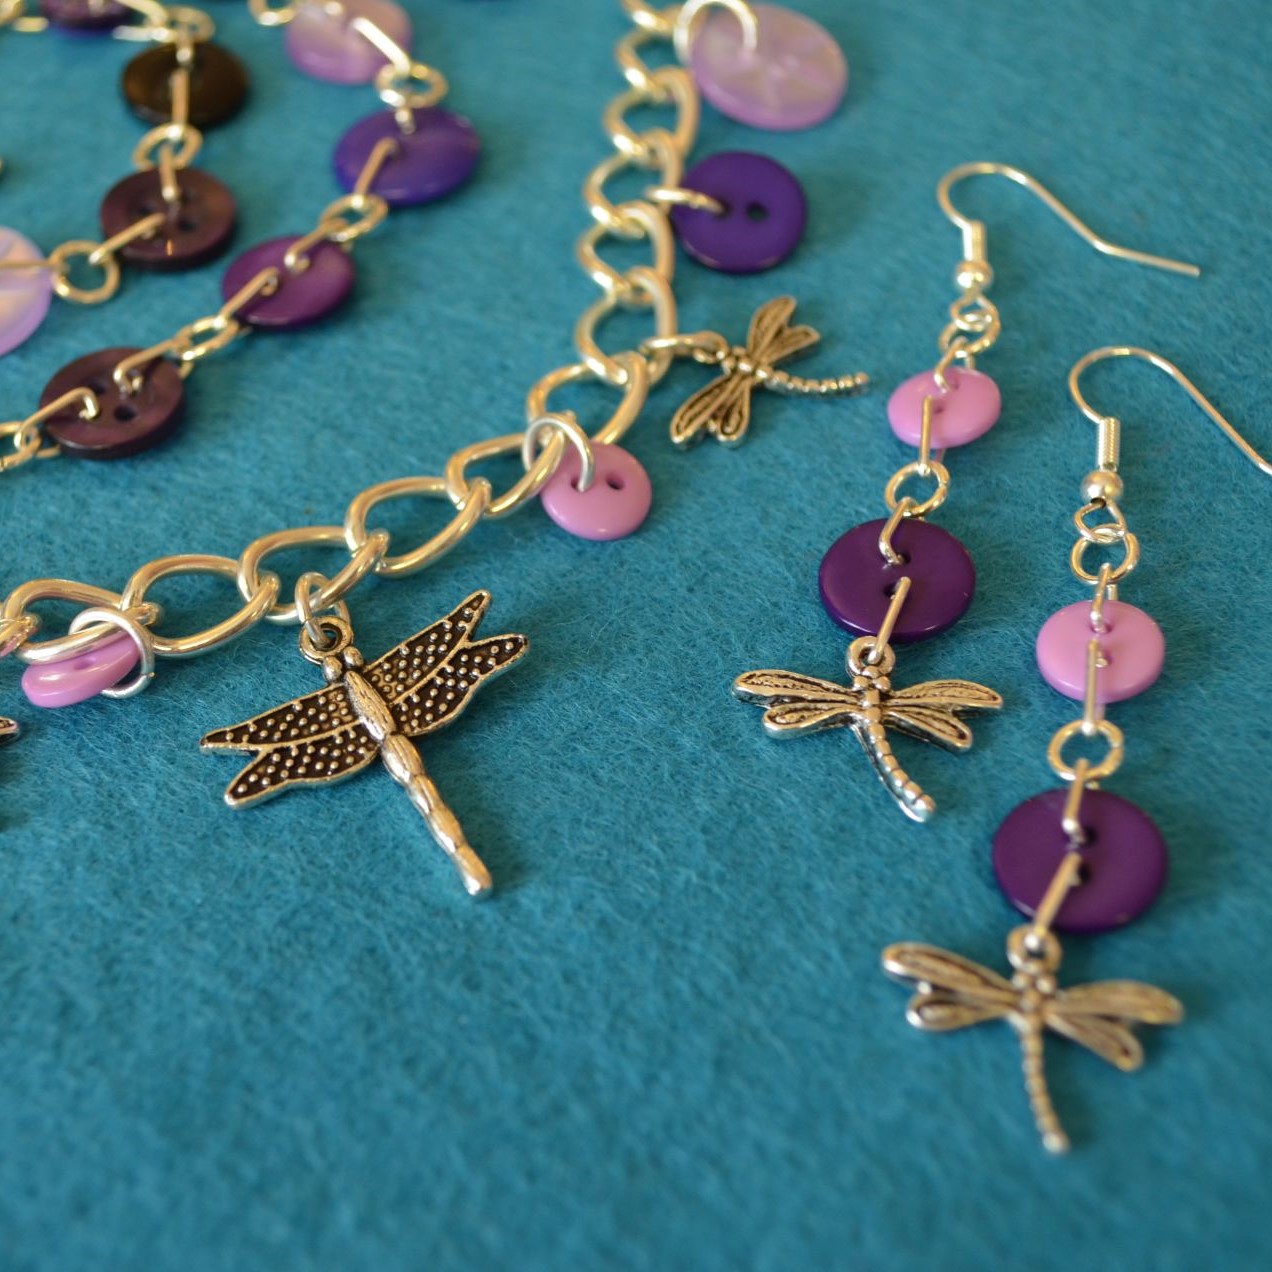 Dragonfly Two Button Charm Earrings